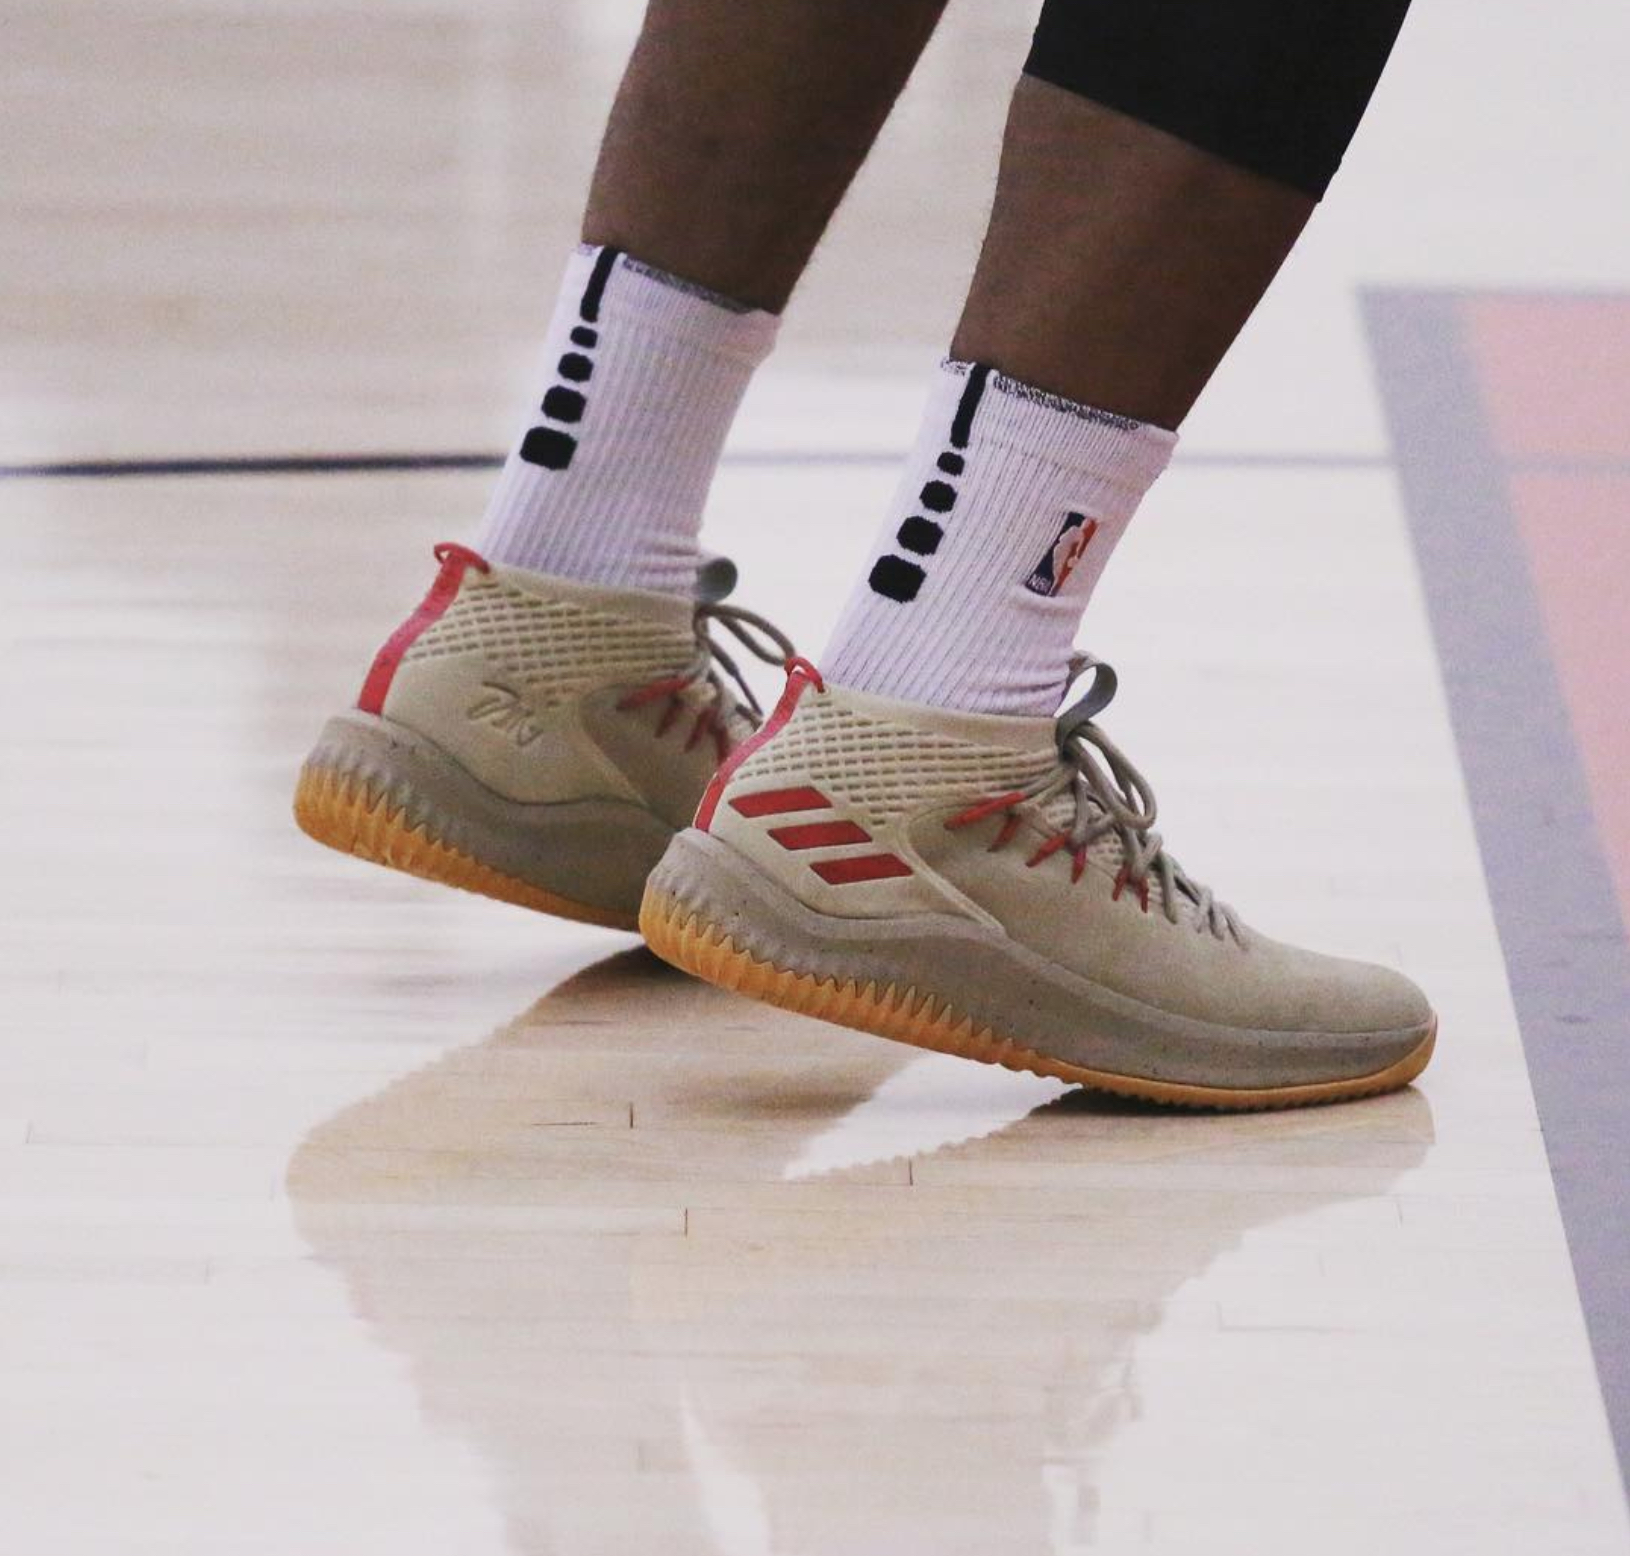 The adidas Dame 4 is Spotted in a Suede 